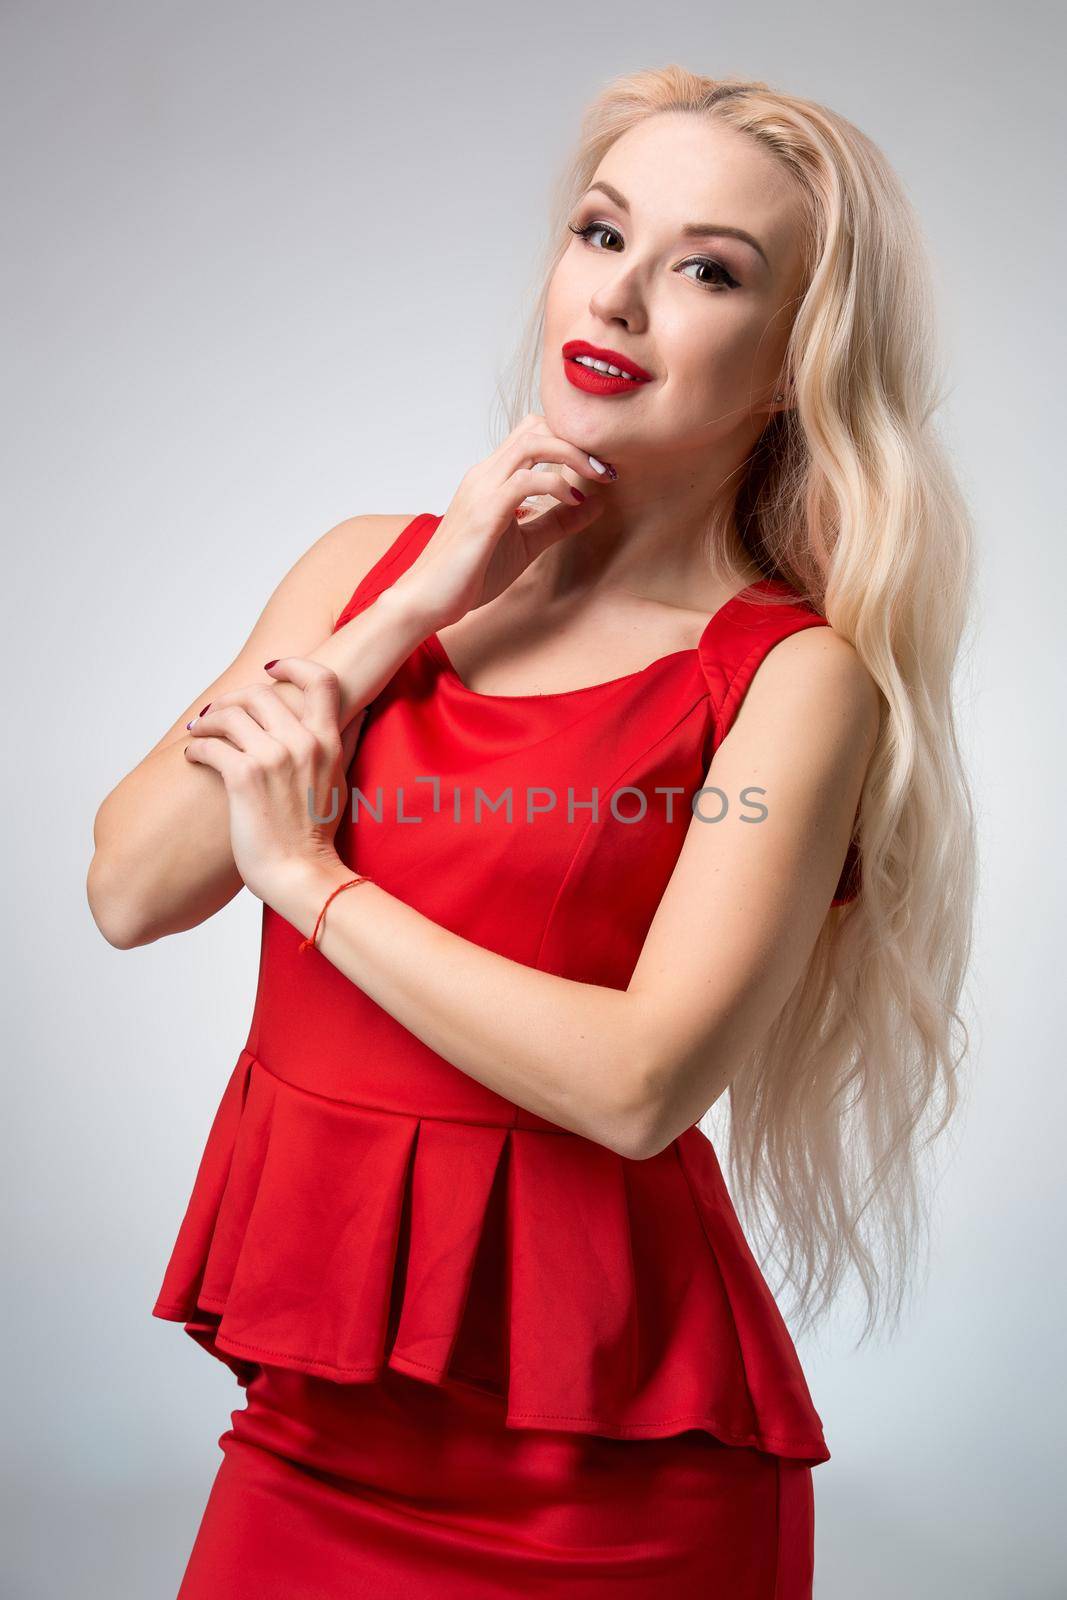 Glamorous young woman in red dress on gray background. She looks into the camera